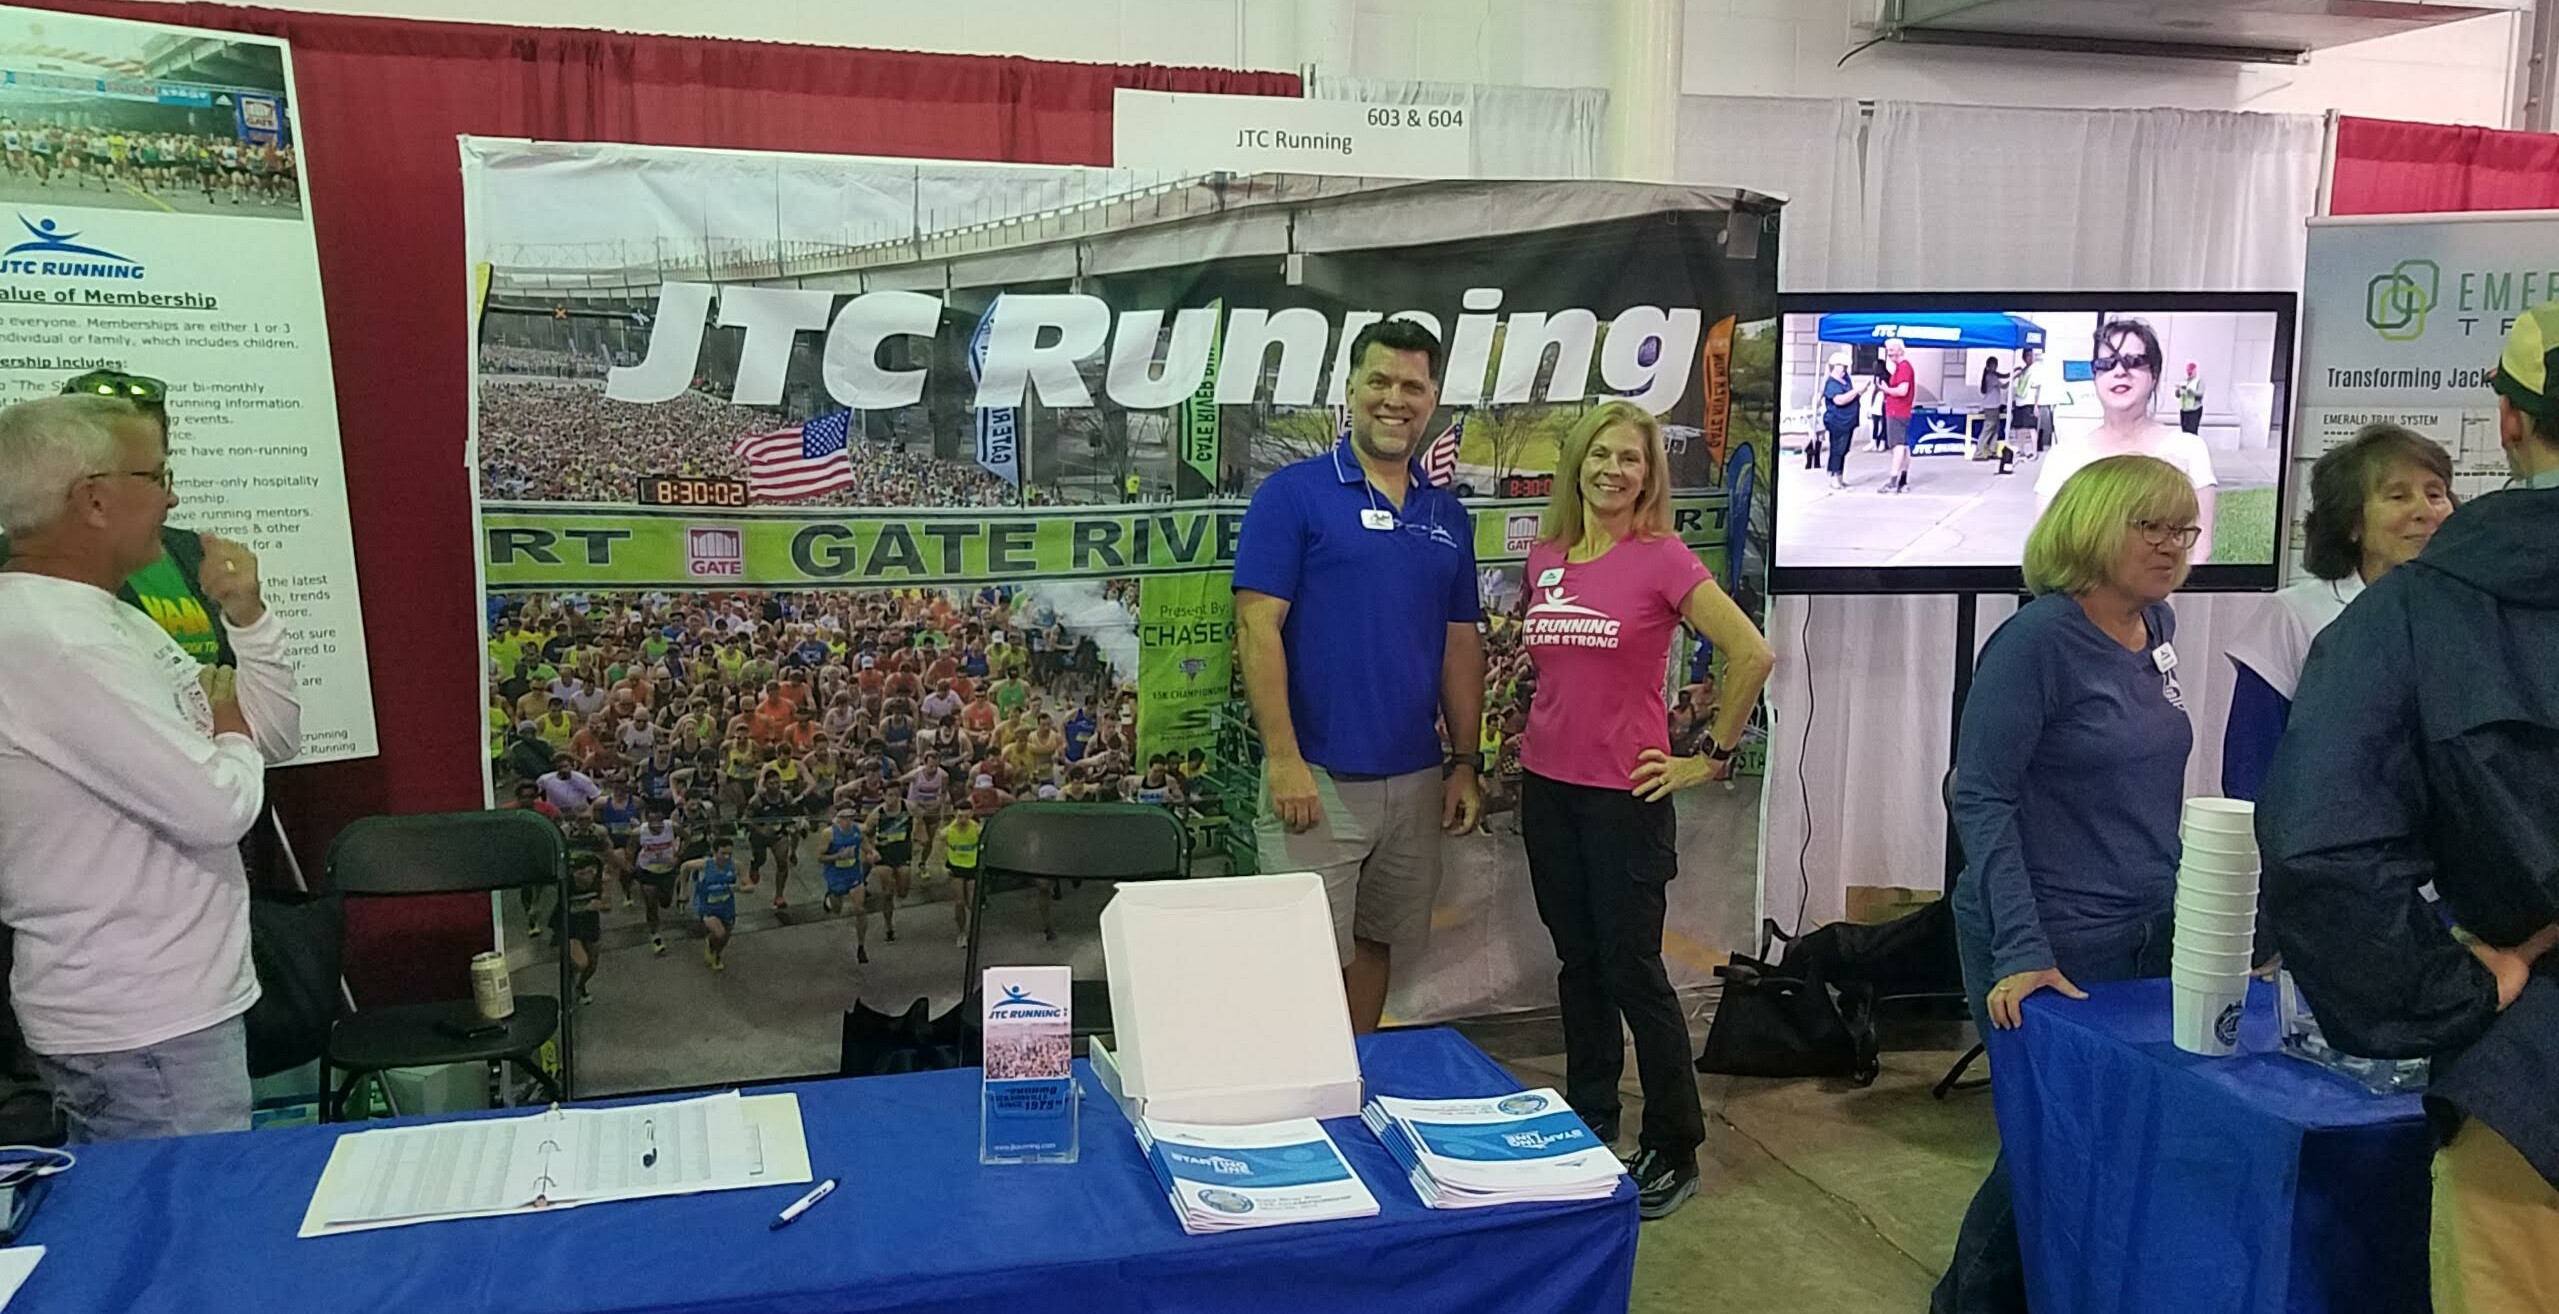 Volunteer for JTC Running’s Gate River Run Expo Booth March 4